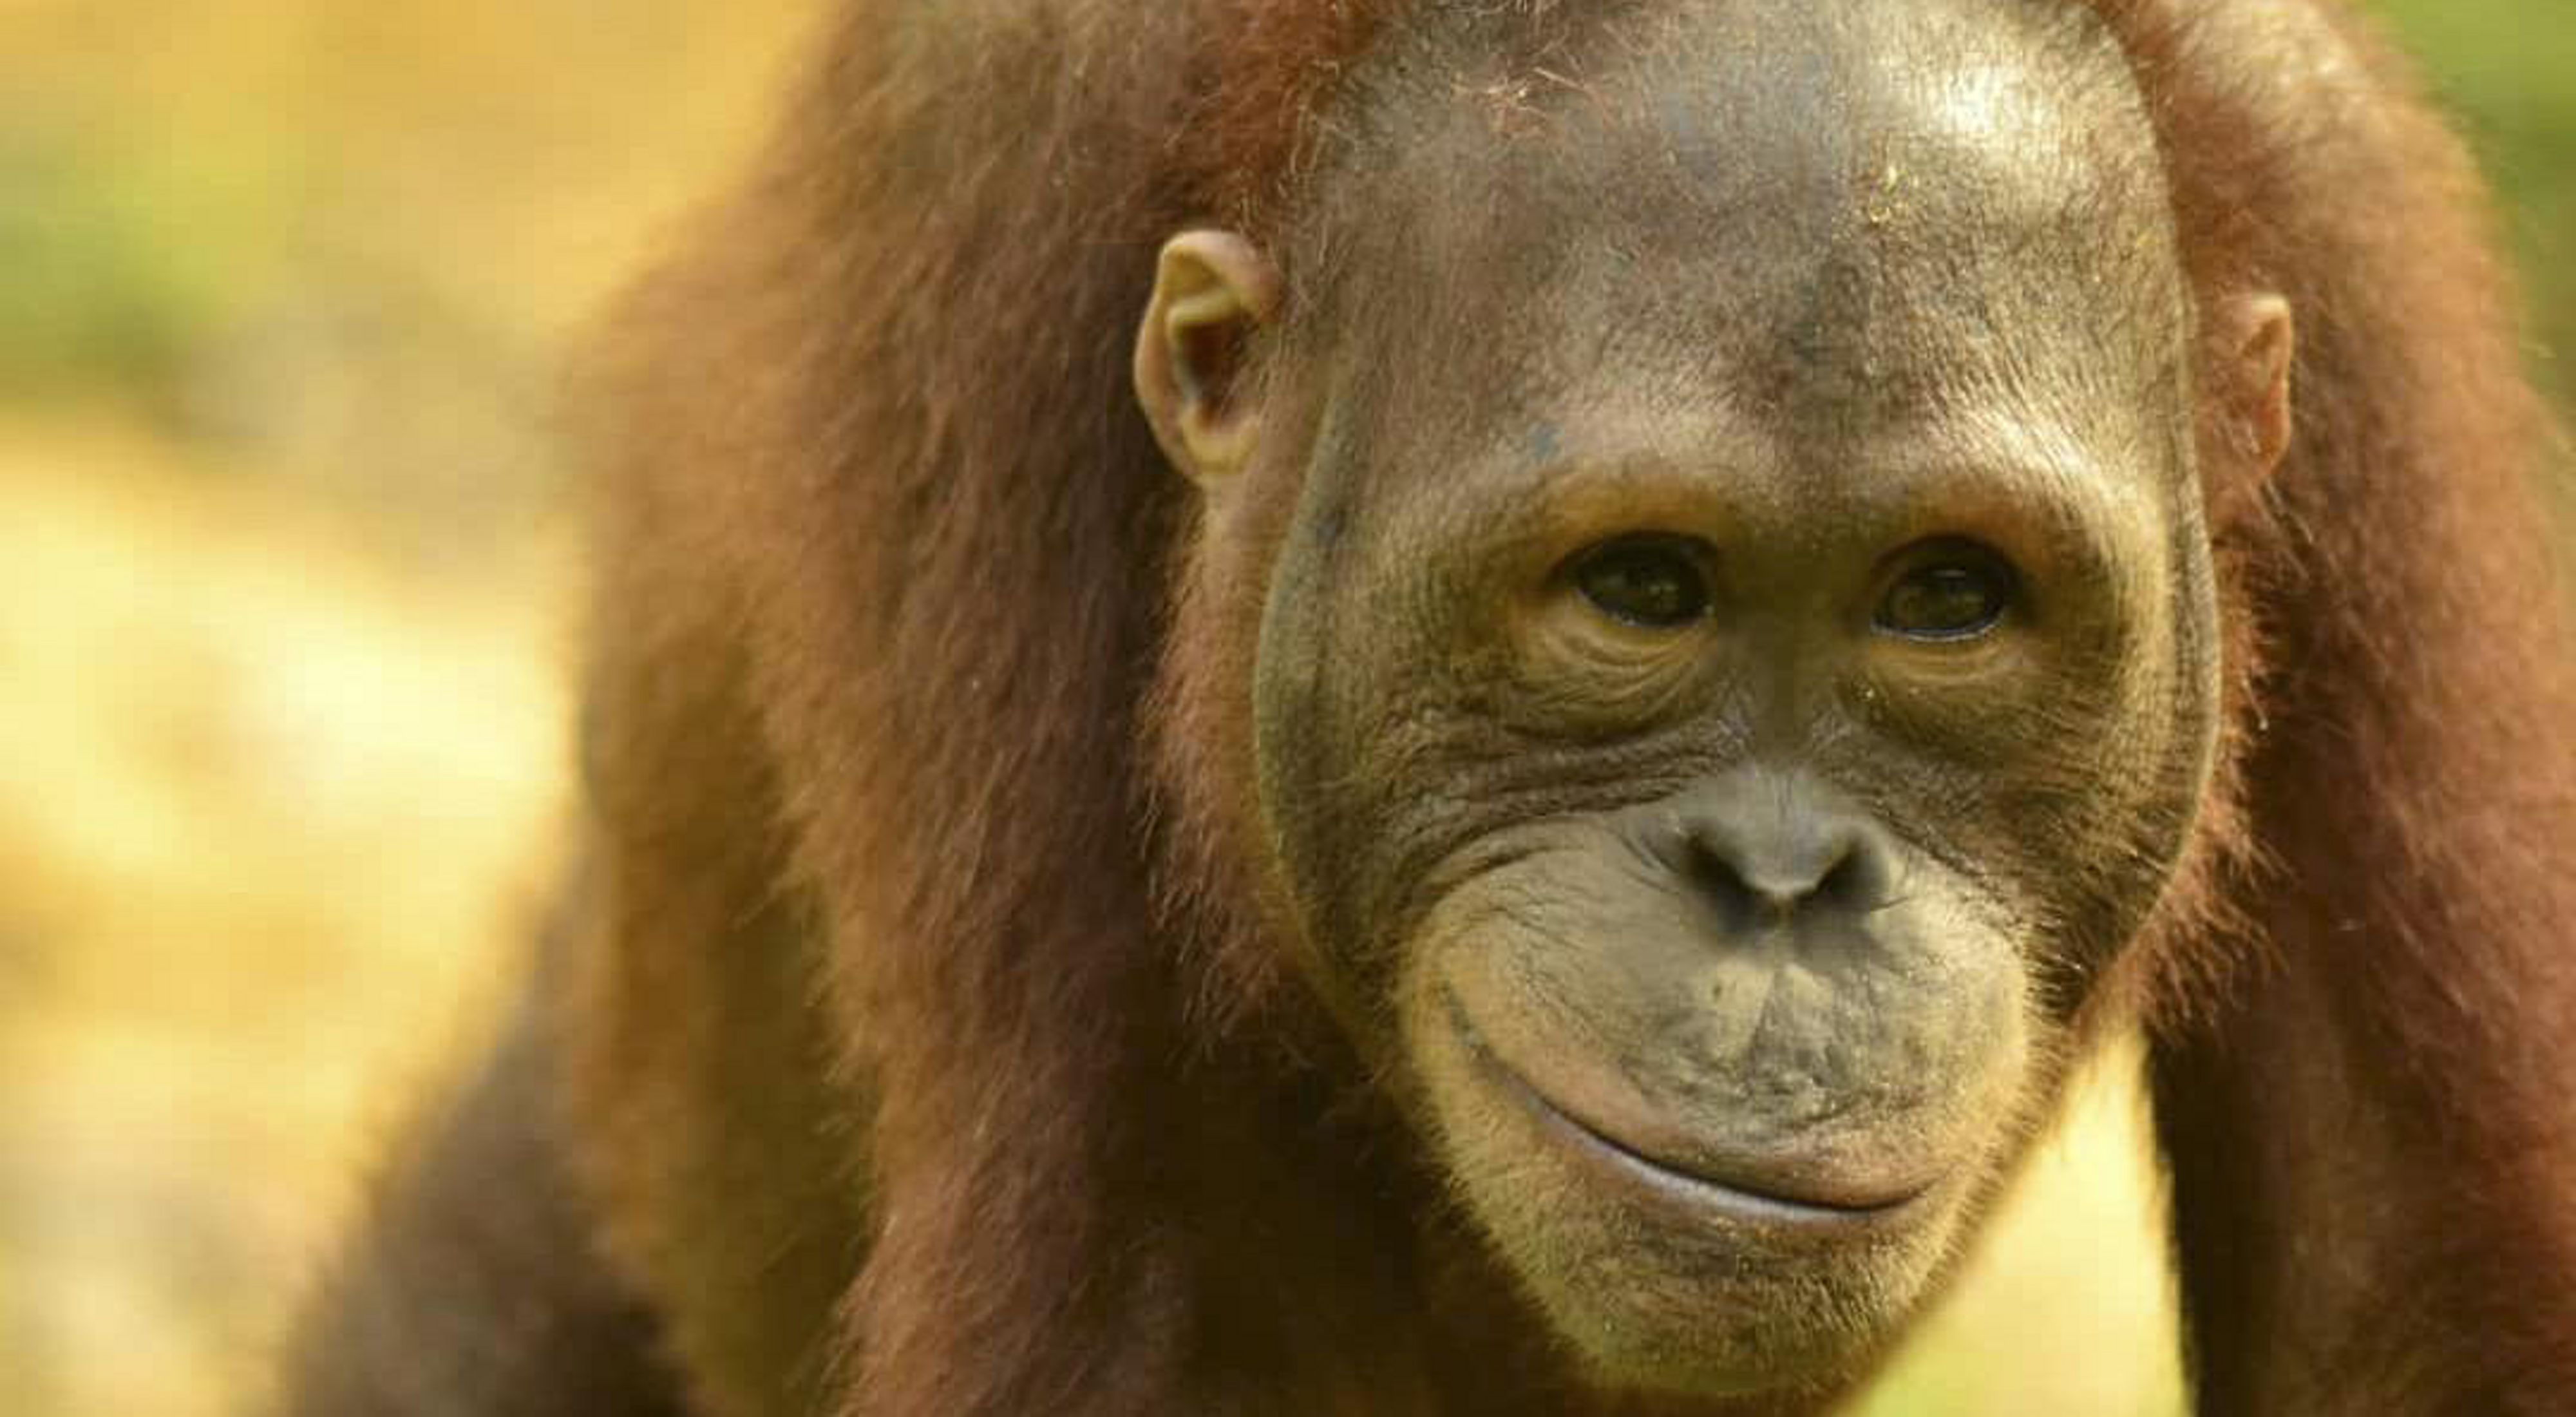 An upclose of an orangutan that appears to be smiling.